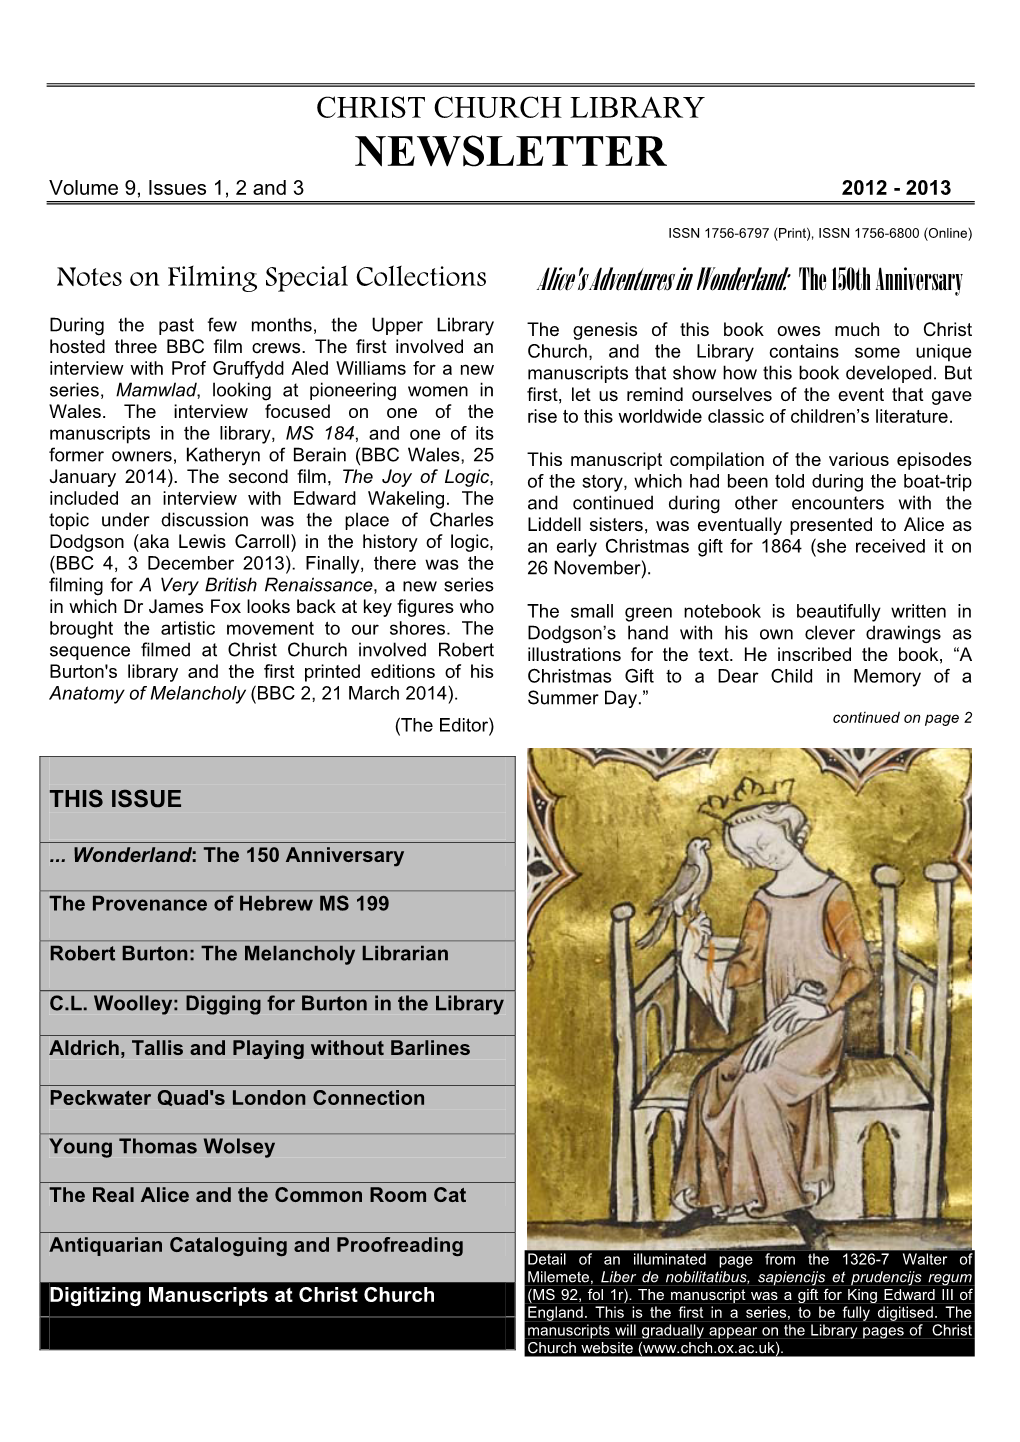 CHRIST CHURCH LIBRARY NEWSLETTER Volume 9, Issues 1, 2 and 3 2012 - 2013